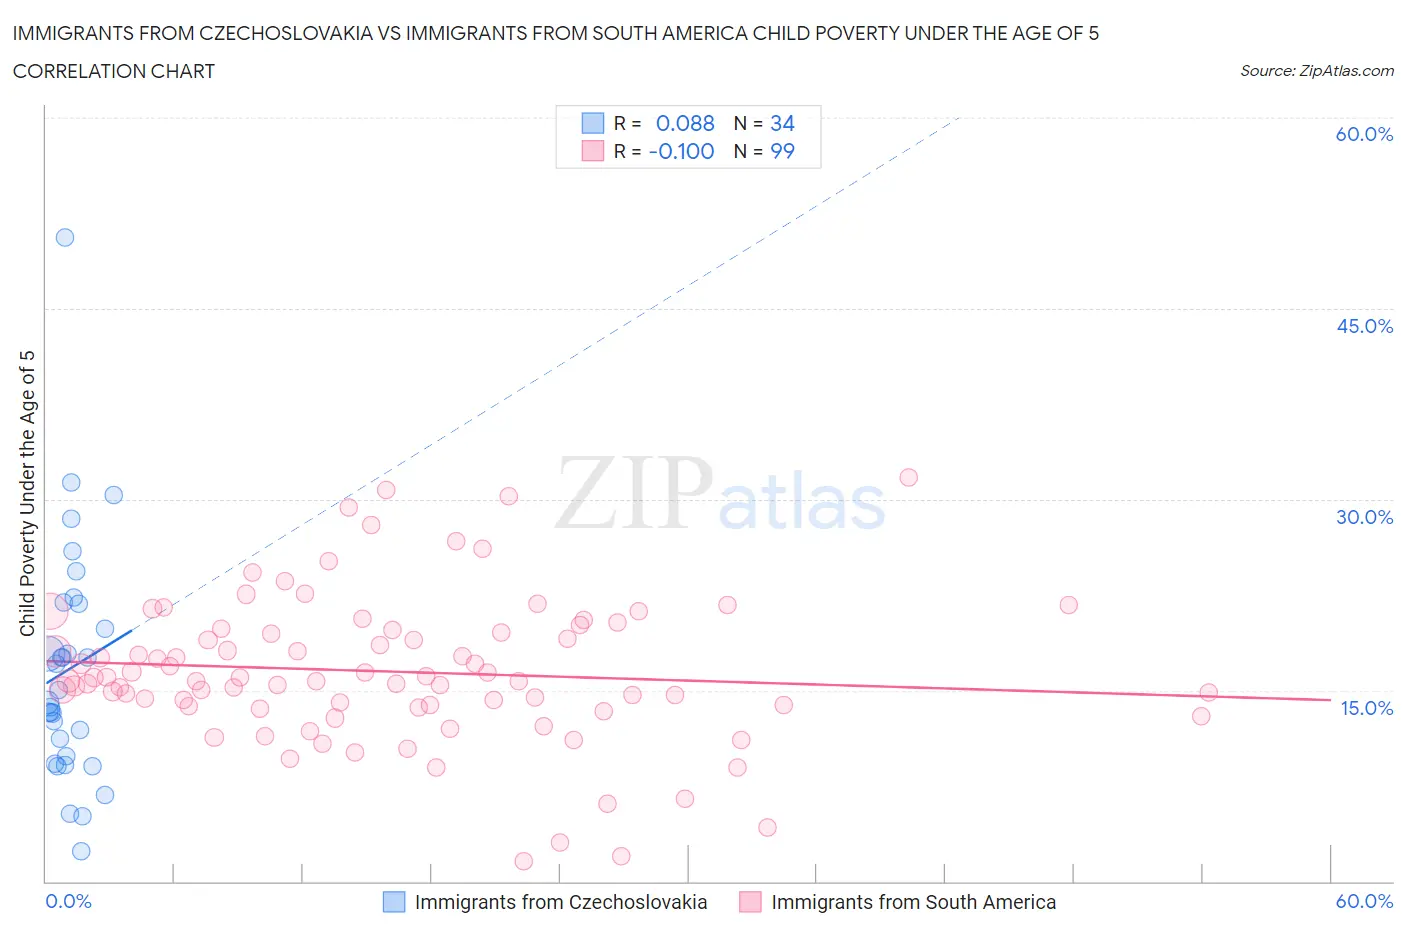 Immigrants from Czechoslovakia vs Immigrants from South America Child Poverty Under the Age of 5